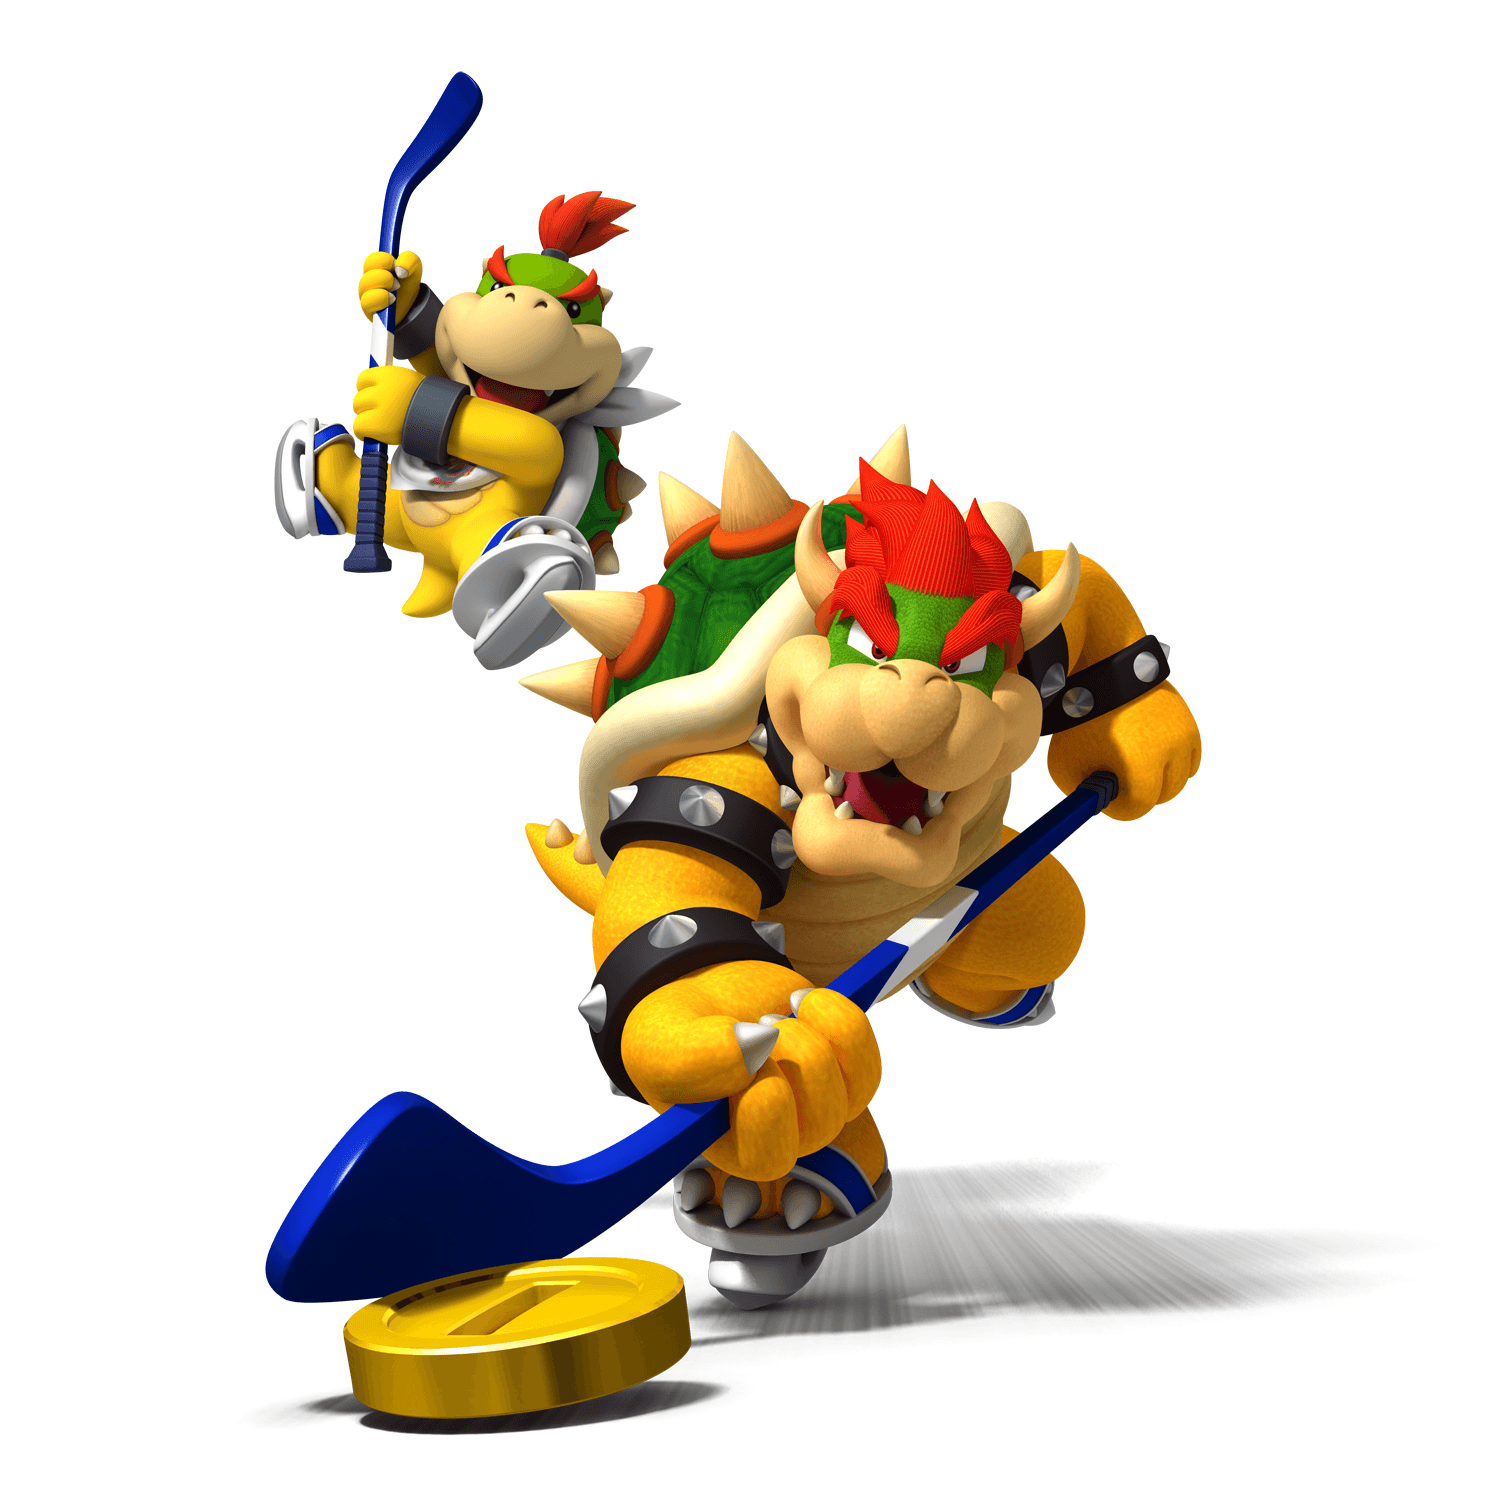 Bowser Jr. screenshots, image and picture